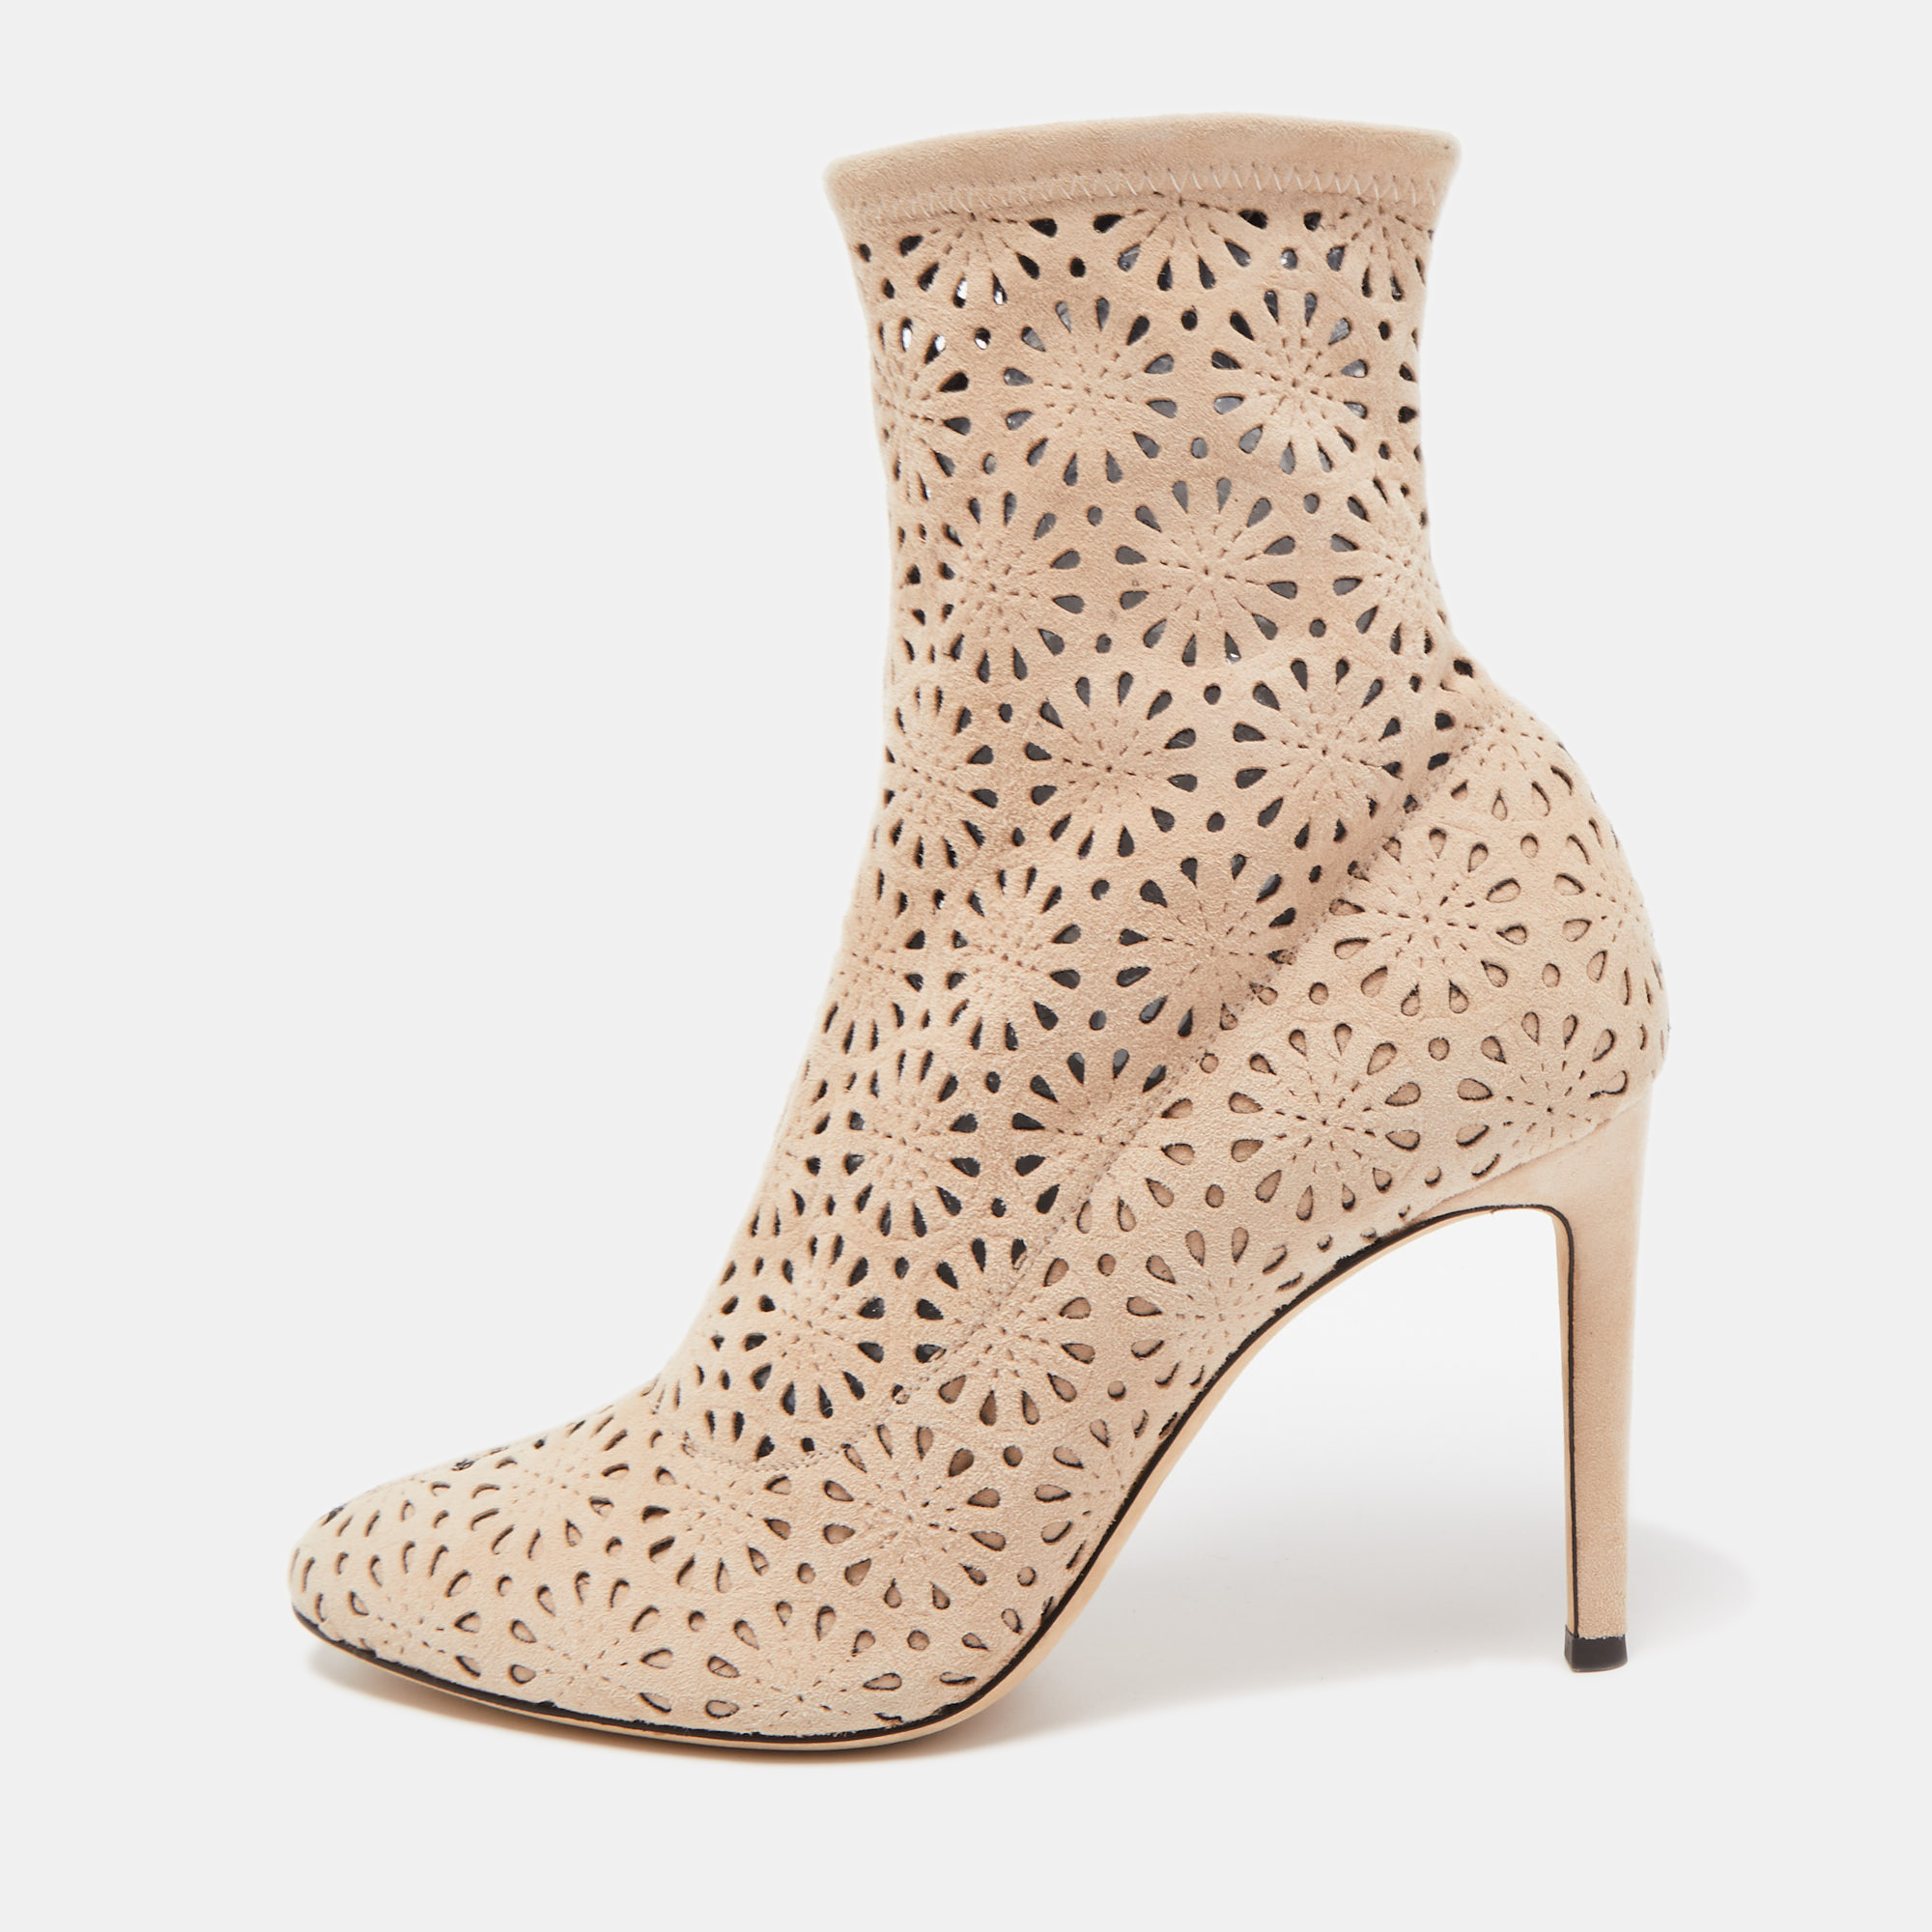 Giuseppe zanotti beige suede ankle boots size 38